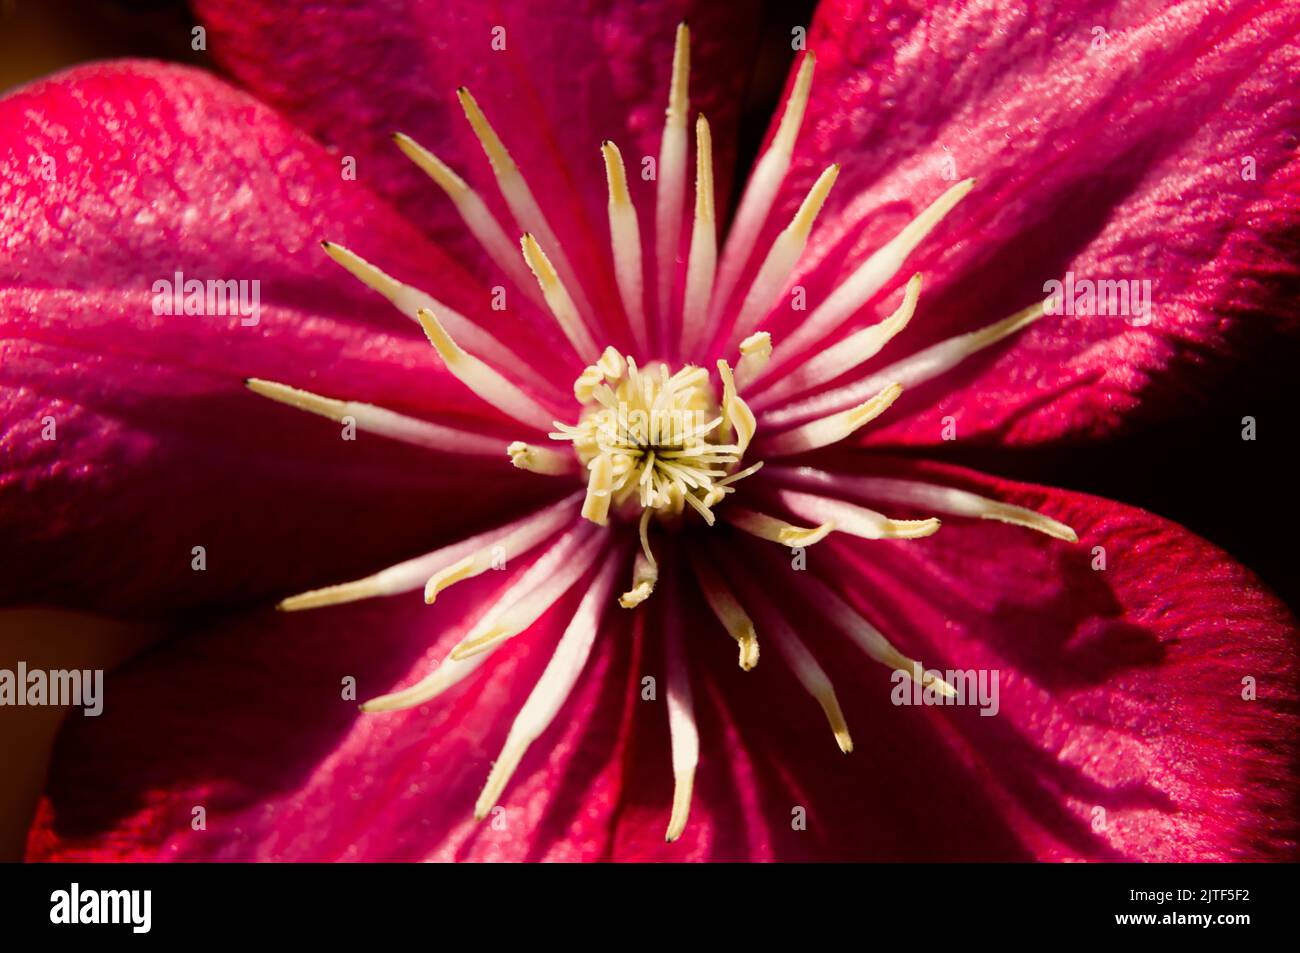 Clematis flower up close Stock Photo